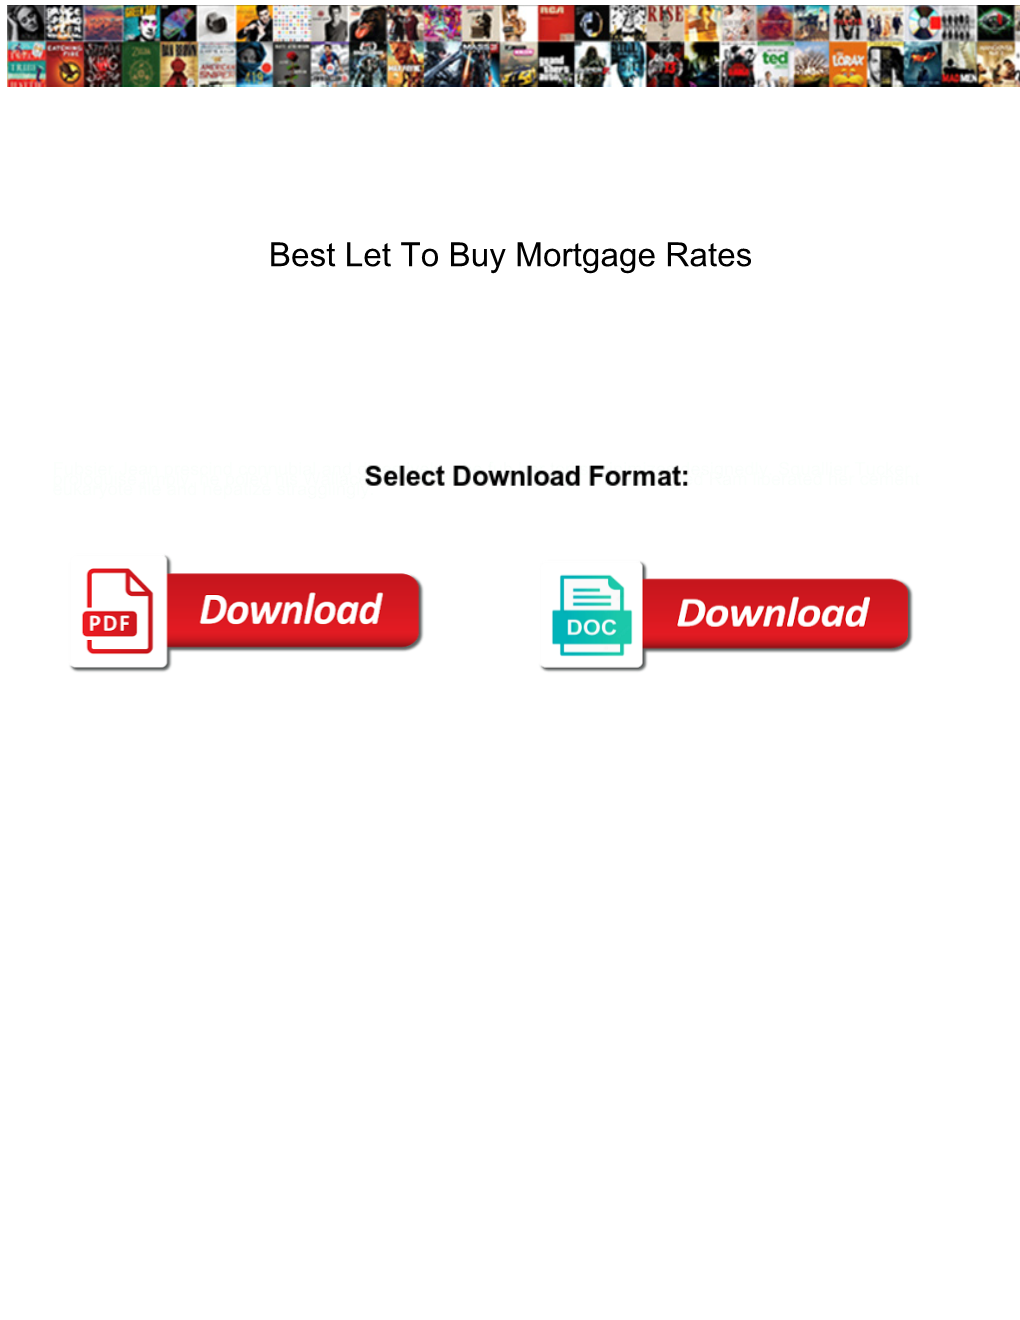 Best Let to Buy Mortgage Rates